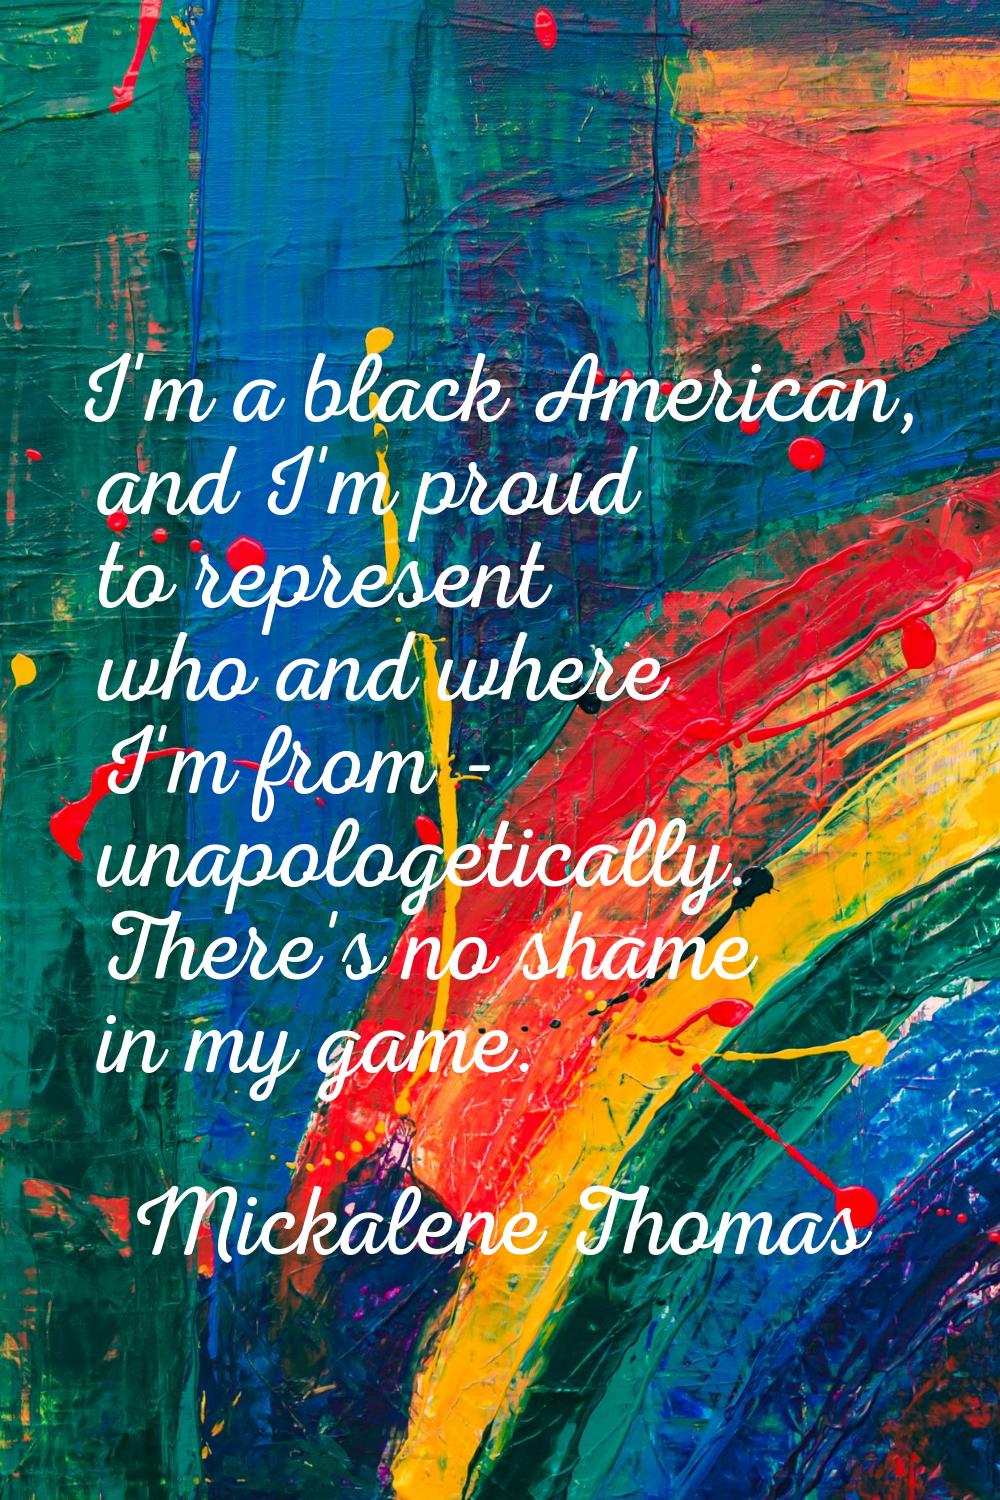 I'm a black American, and I'm proud to represent who and where I'm from - unapologetically. There's